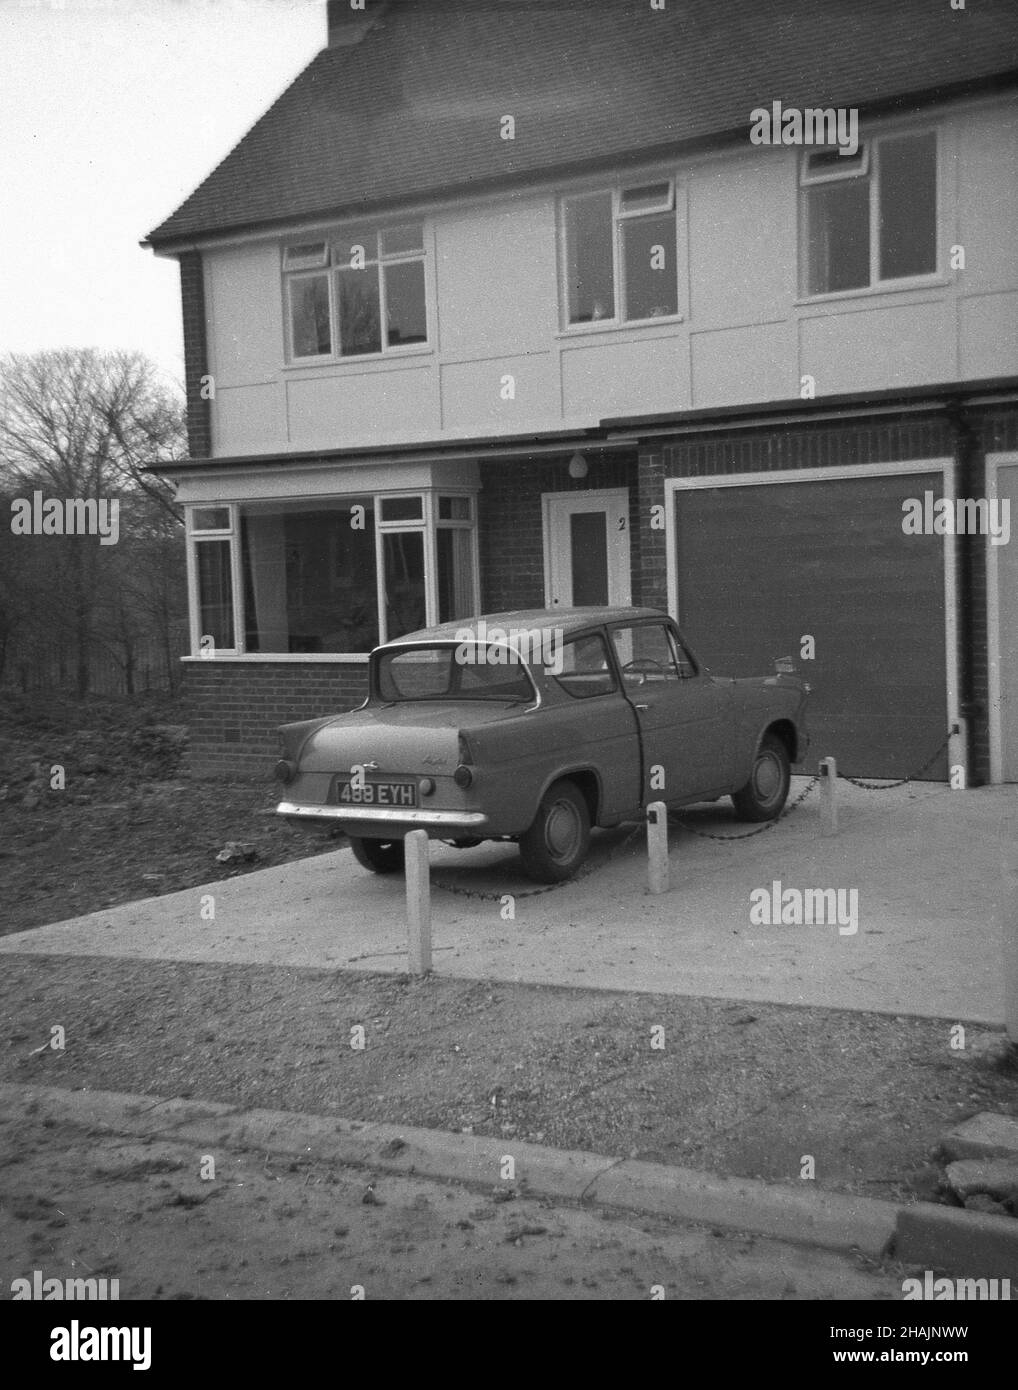 1963, historical, a Ford Anglia car of the era parked on a driveway of a recently constructed end of terraced, two-storey, semi-detached house on a new modern housing estate, Essex, England. UK Stock Photo